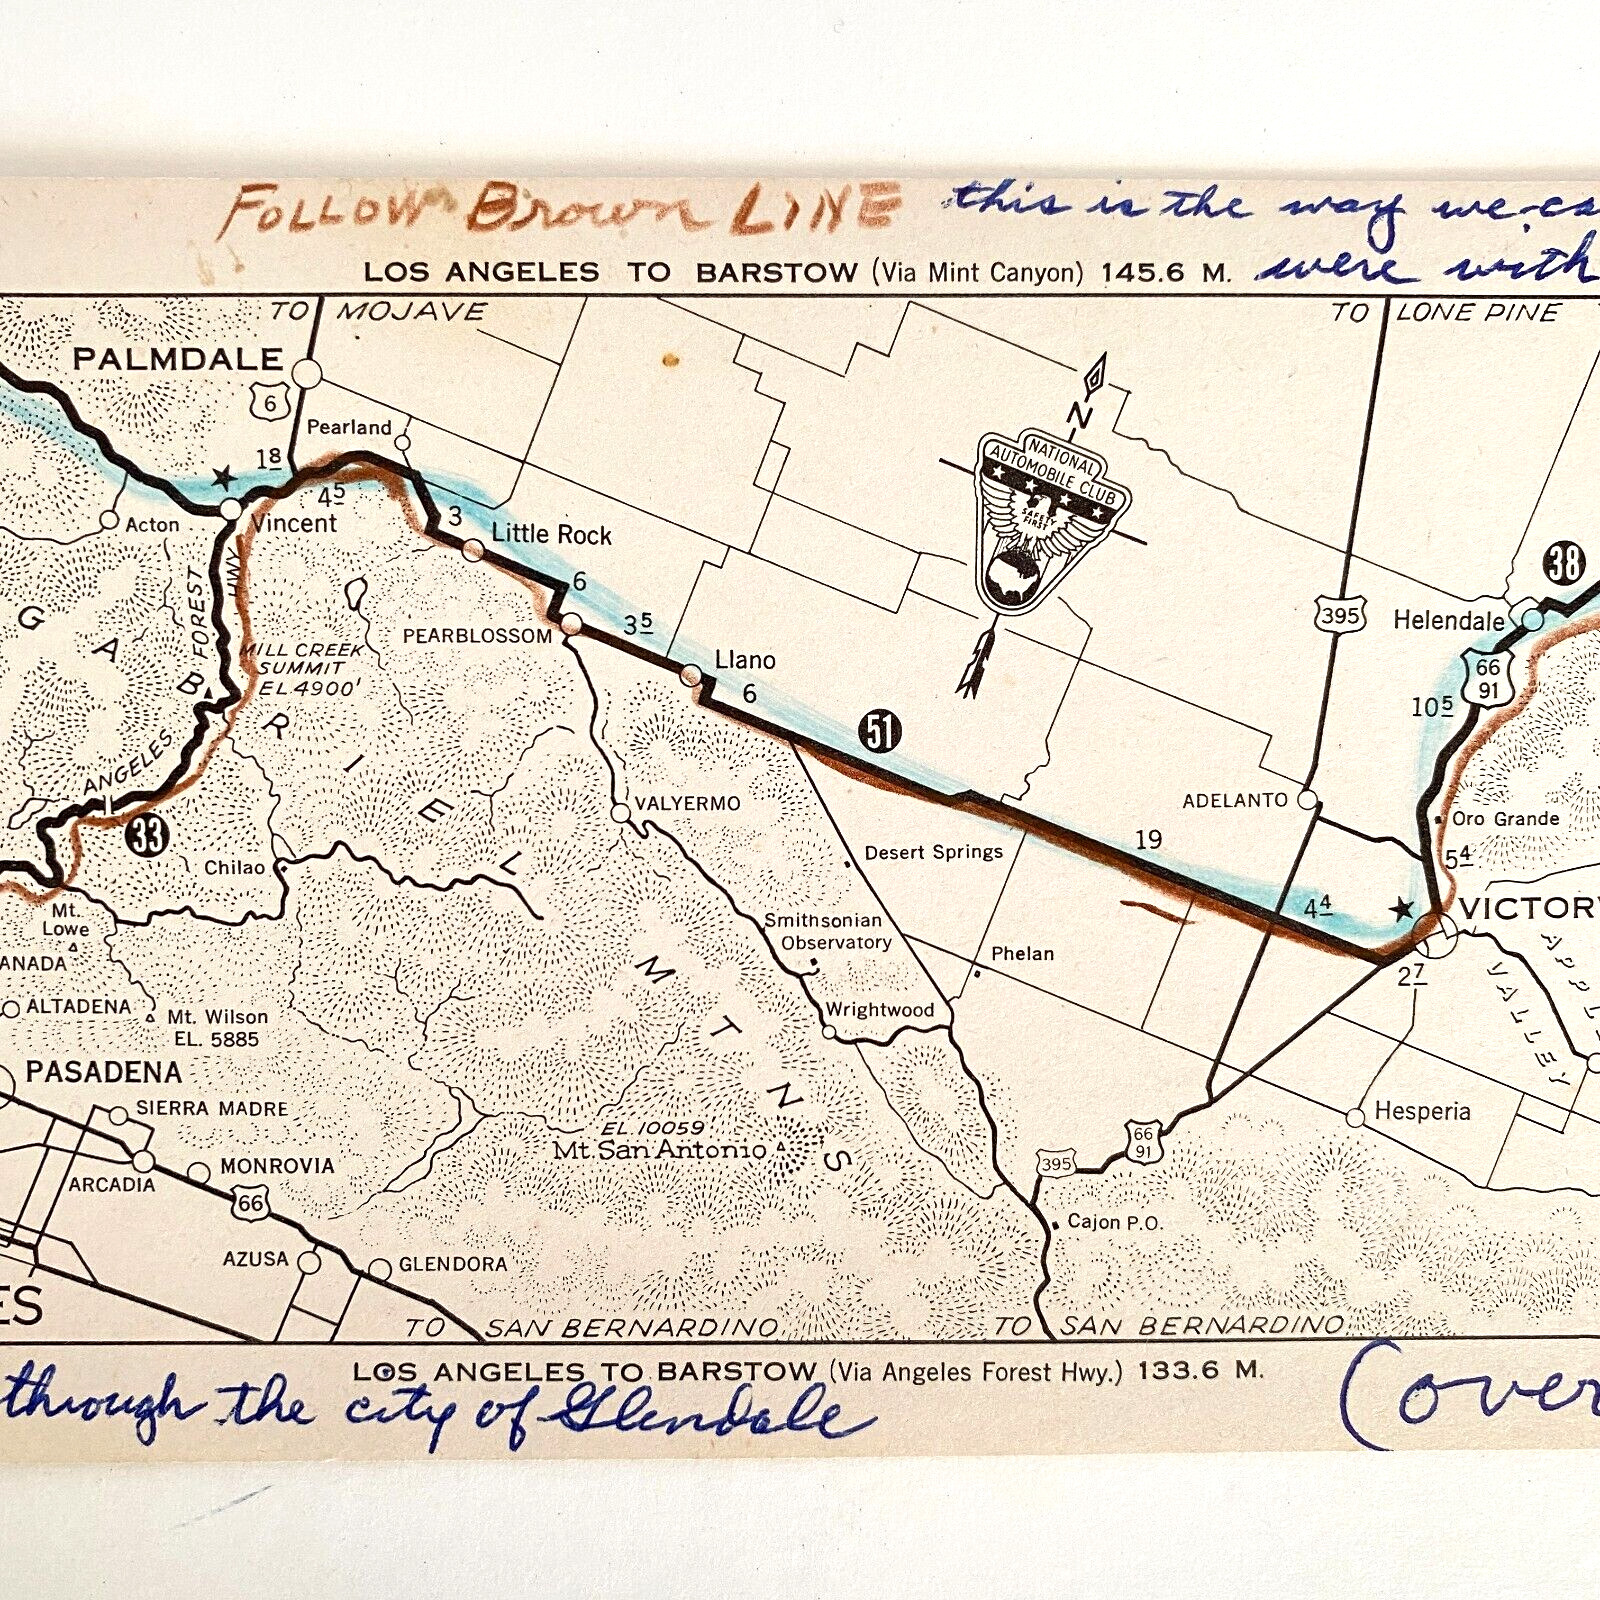 c1950s National Automobile Club Los Angeles to Barstow Written Directions Card